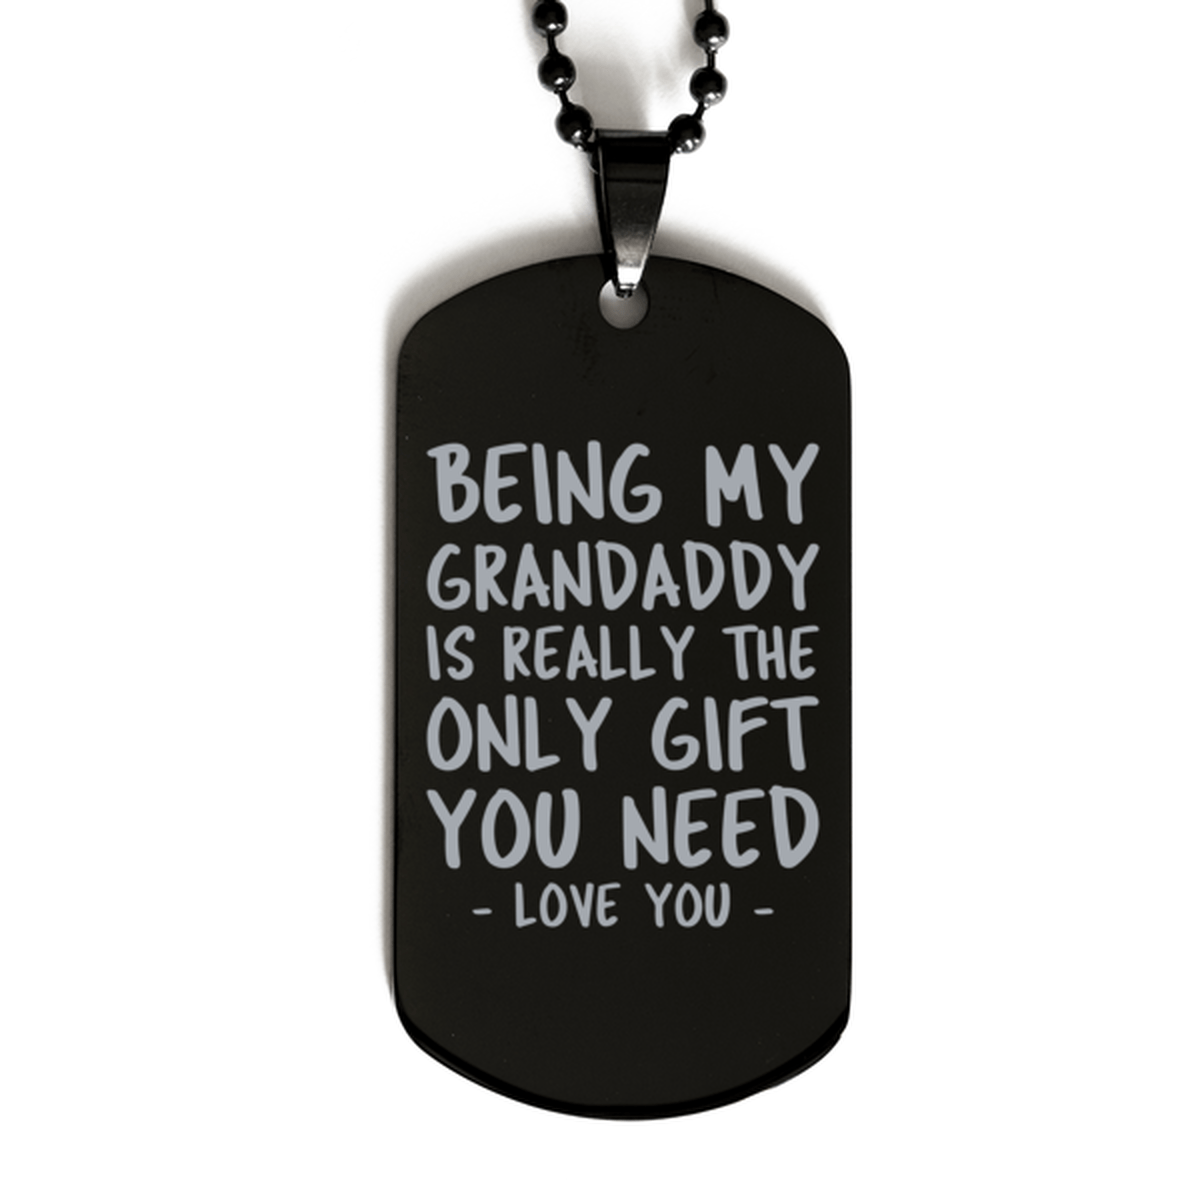 Funny Grandaddy Black Dog Tag Necklace, Being My Grandaddy Is Really the Only Gift You Need, Best Birthday Gifts for Grandaddy